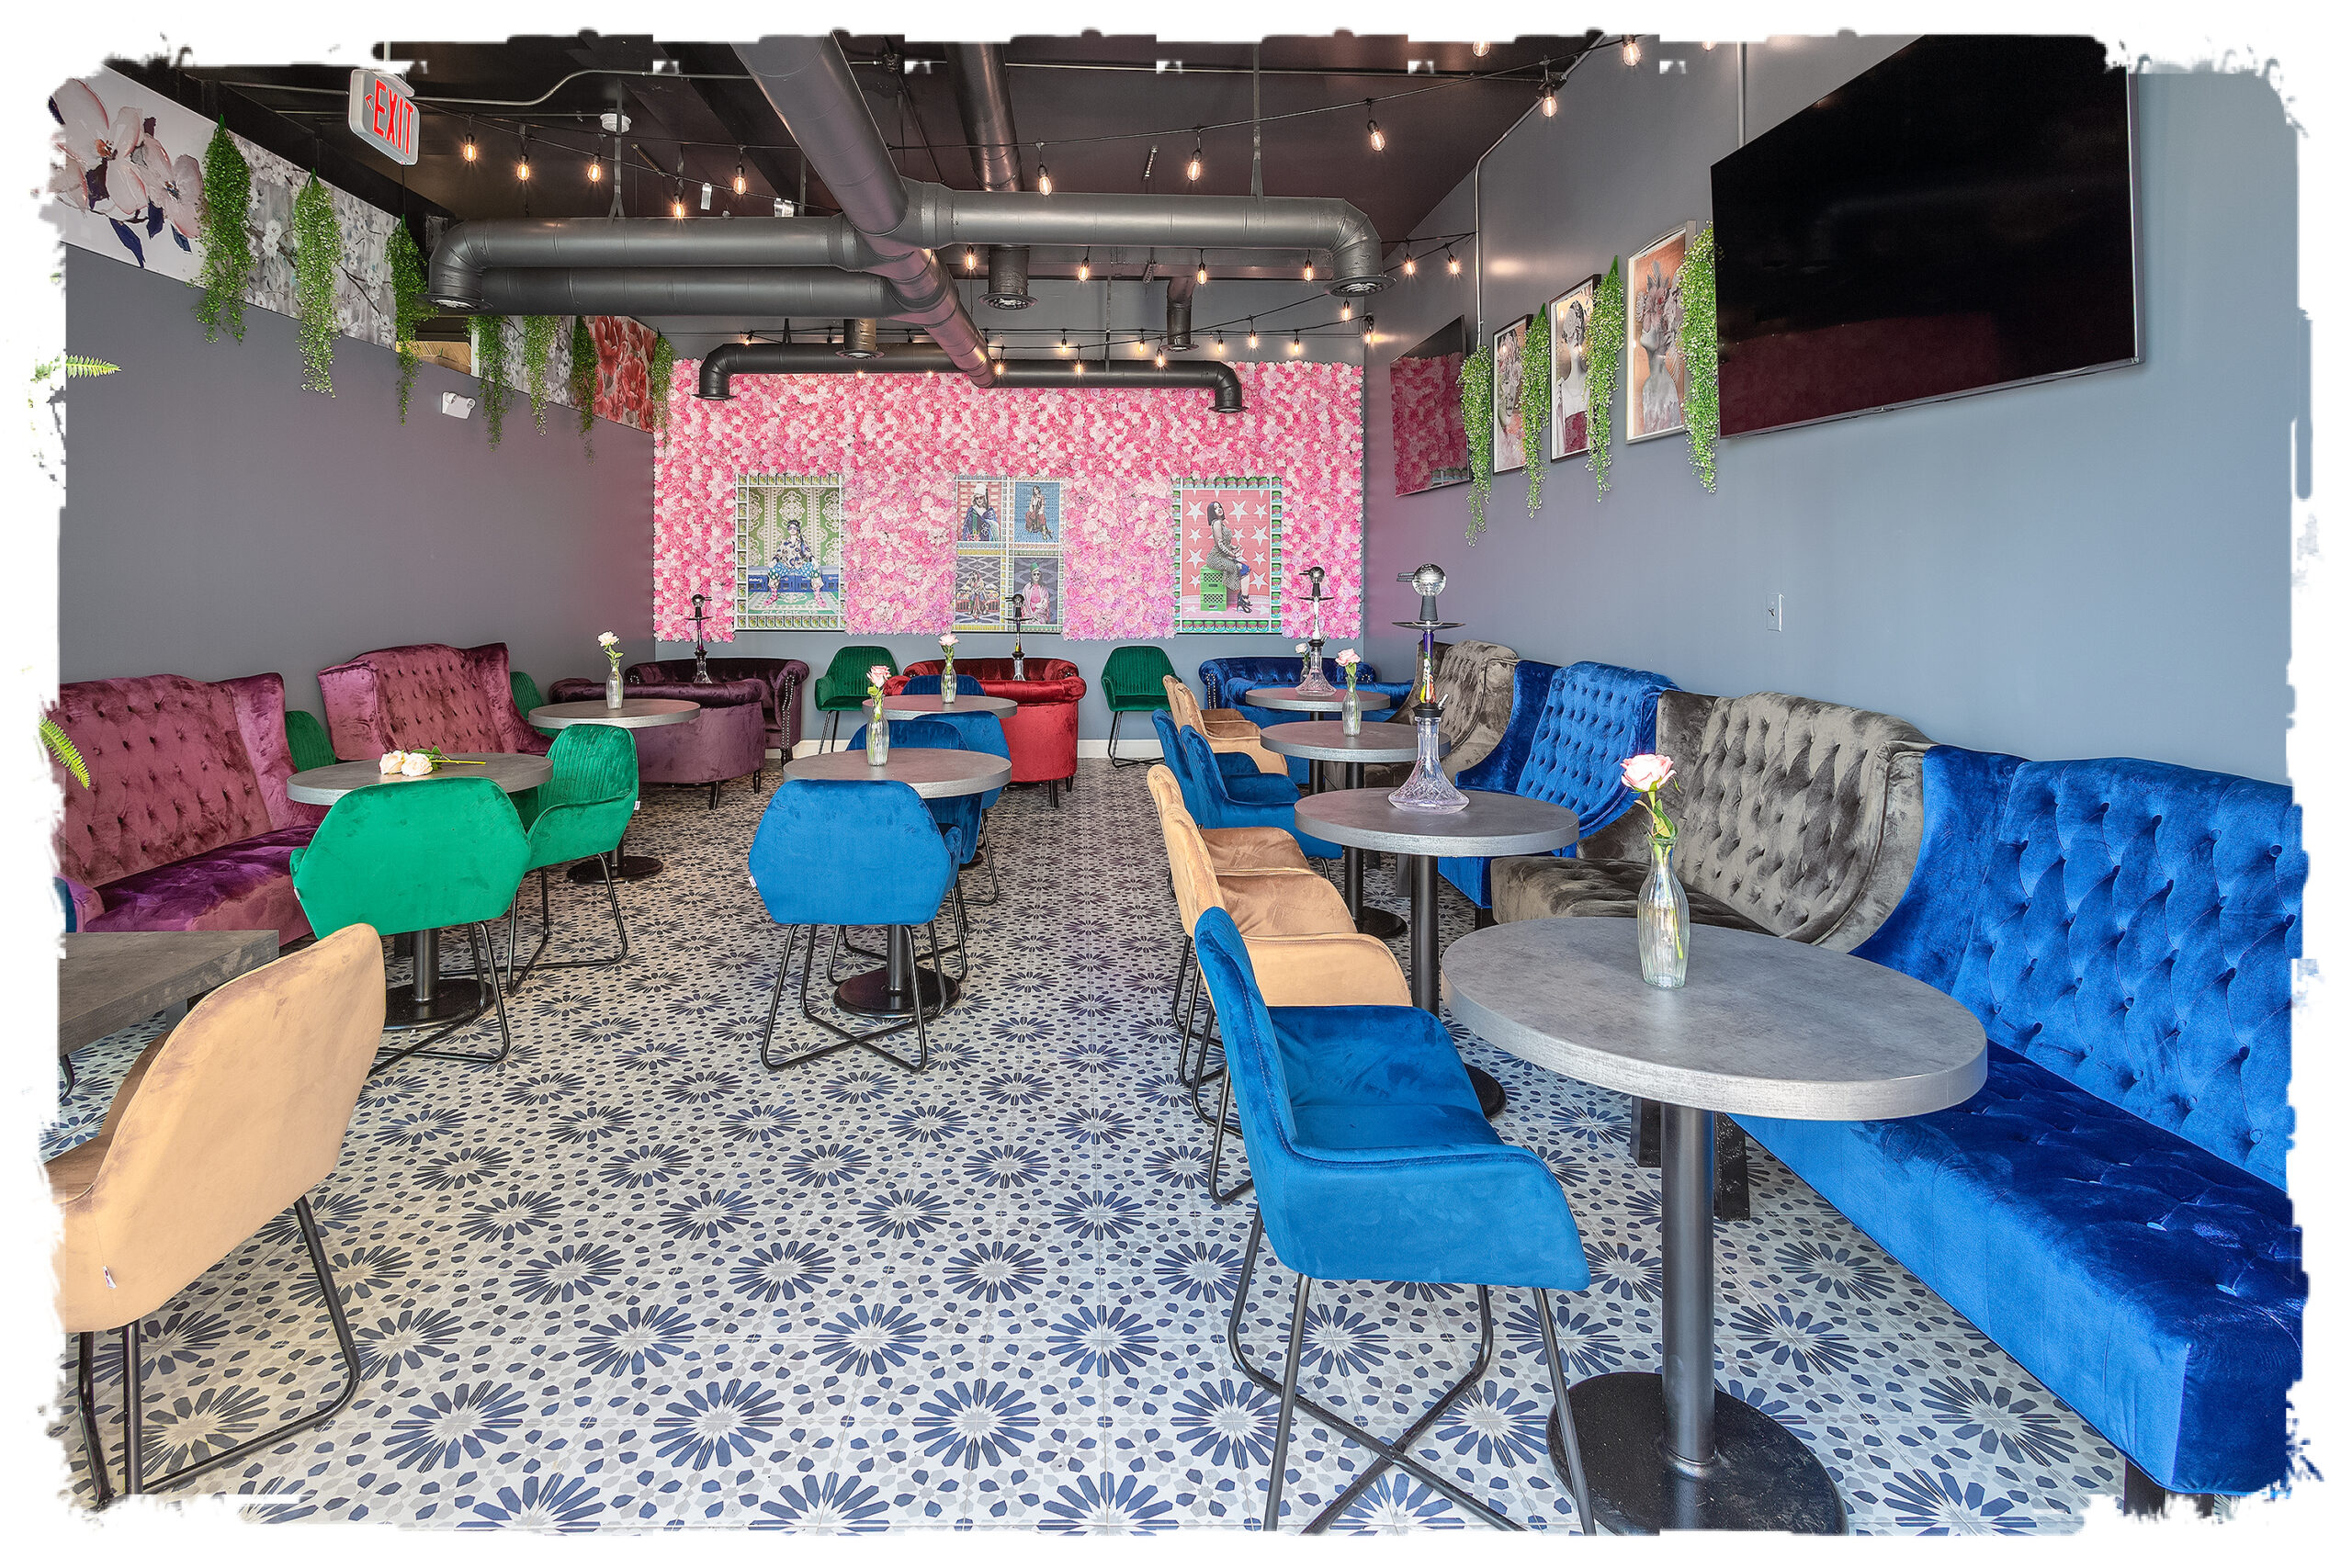 Experience the best of both worlds at Le Jardin Hookah, where we offer a wide range of delicious beverages and sweet treats to enjoy with our premium hookah selection., Hookah lounge in Falls Church VA, SHisha bar and cafe 